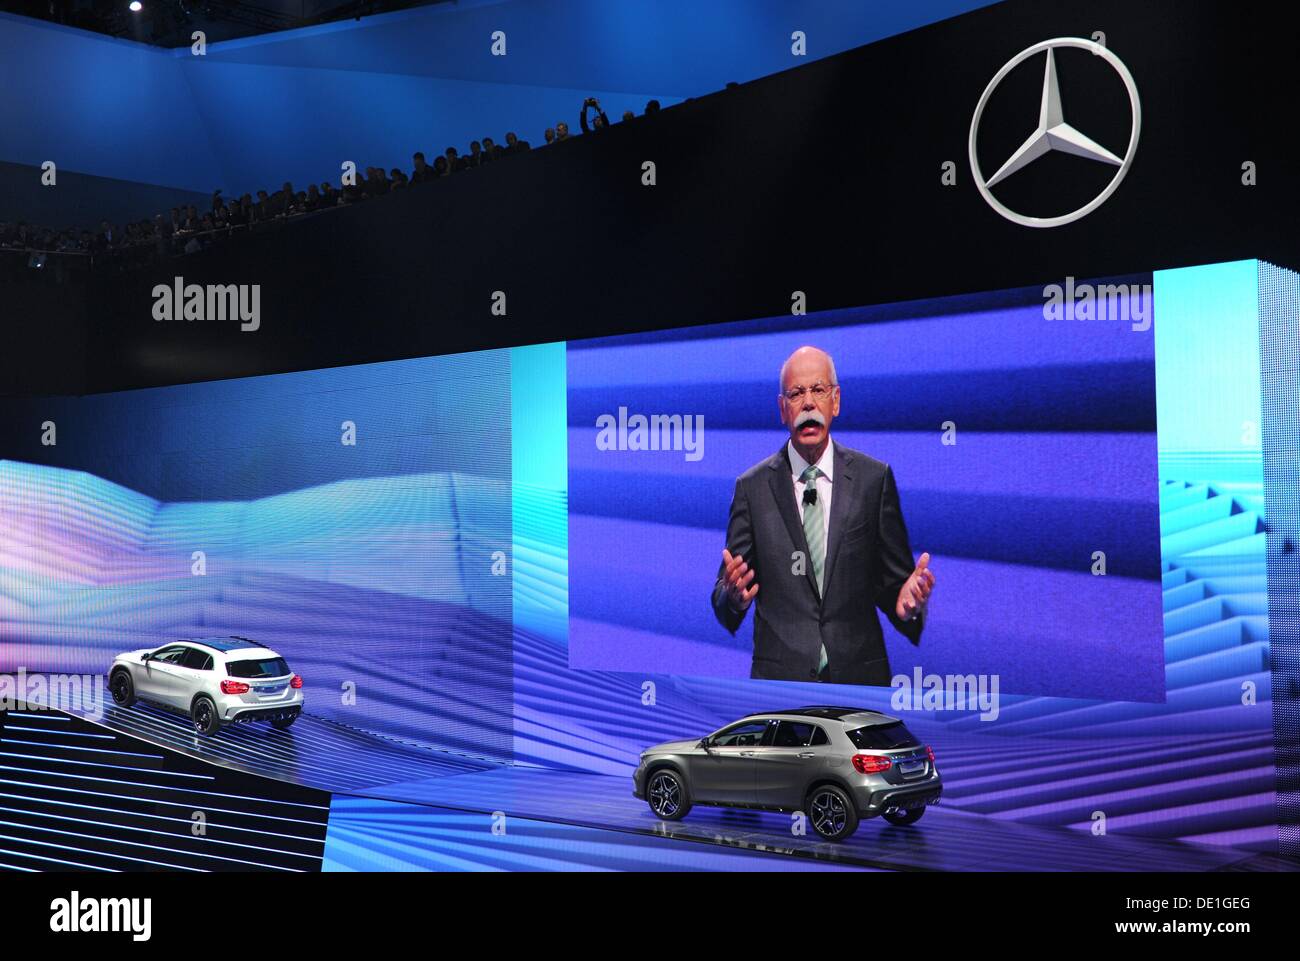 Frankfurt, Germany. 10th Sep, 2013. Chairman Dieter Zetsche presents the new GLA Class at the Mercedes Benz stand during the press day of the Frankfurt Motor Show IAA in Frankfurt, Germany, 10 September 2013. One of the most important car exhibitions in the world, Frankfurt Motor Show will be opened officially 12 September by German Chancellor Angela Merkel, running until 22 September 2013. Photo: UWE ZUCCHI/dpa/Alamy Live News/dpa/Alamy Live News Stock Photo